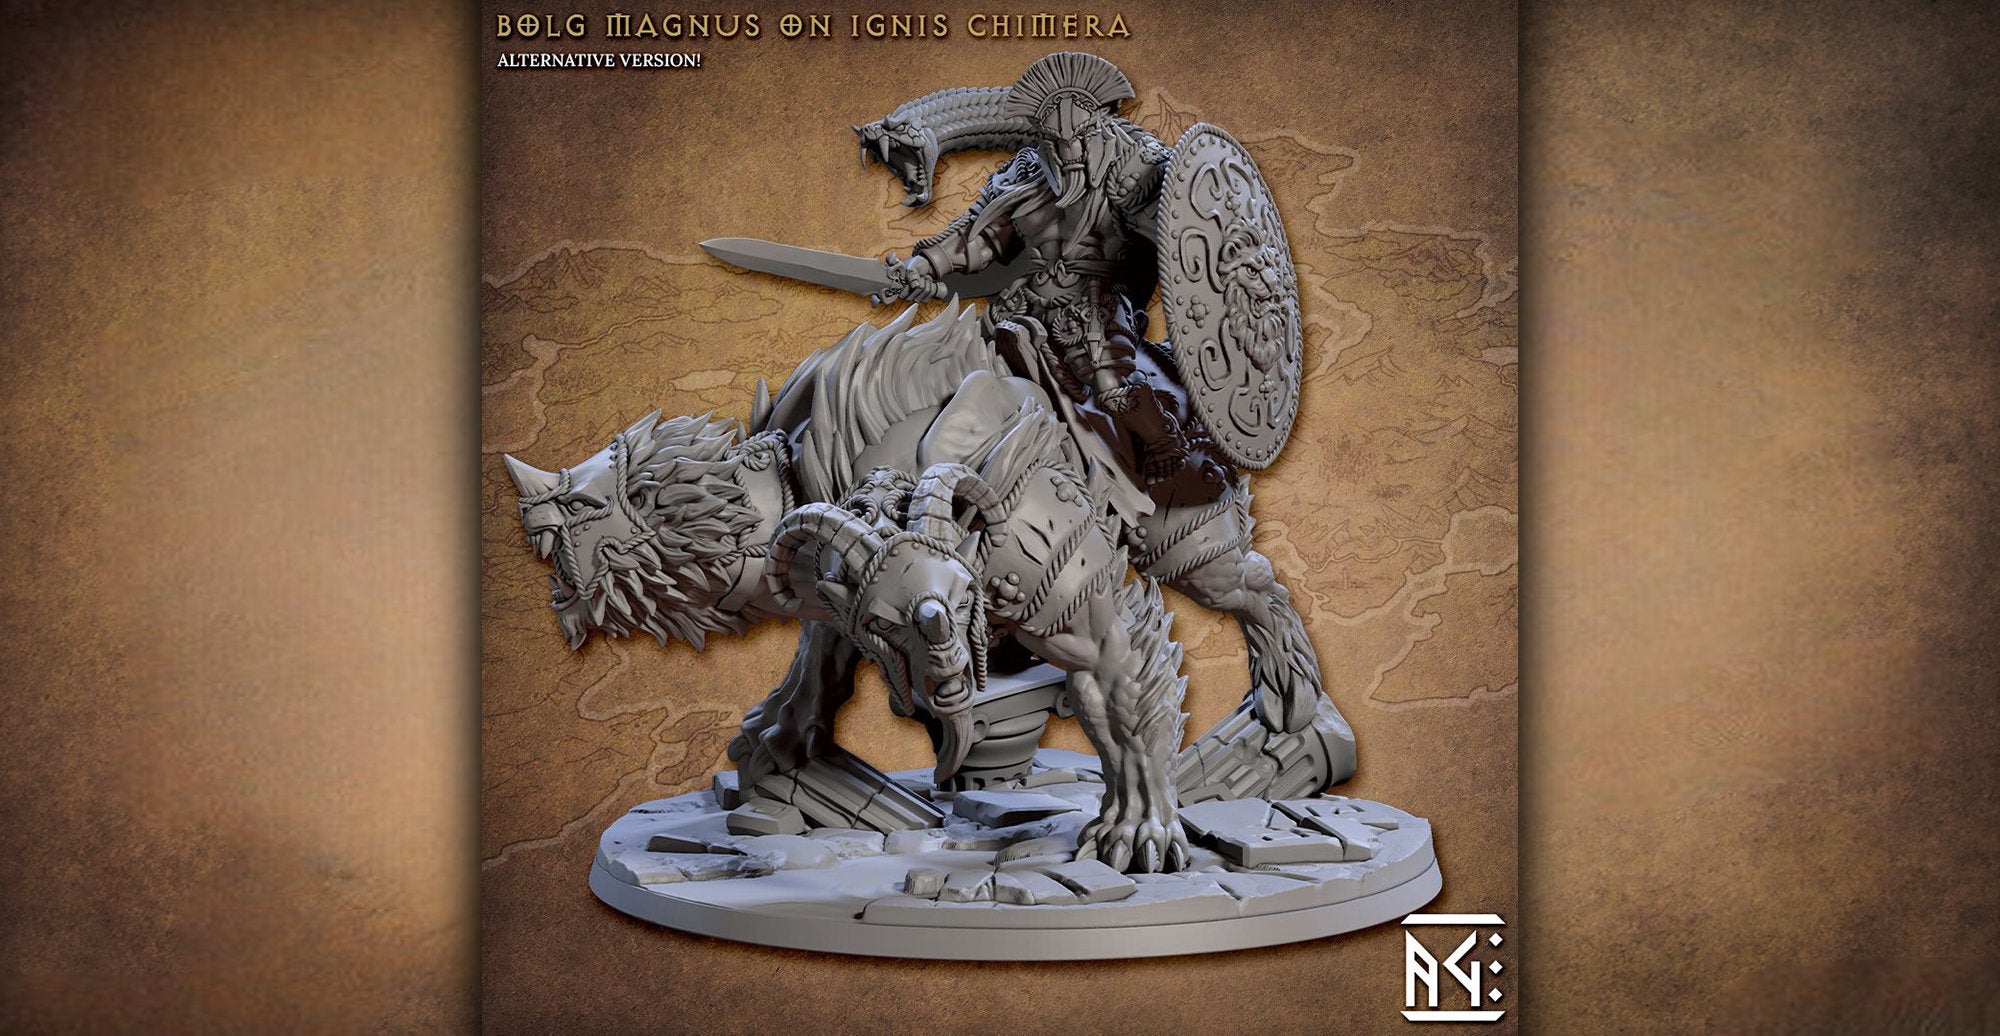 HOBGOBLIN + CHIMERA "Bolg on Chimera" | 12K 3D Print | Dungeons and Dragons | DnD | Pathfinder | Tabletop | RPG | Hero Size | 28-32 mm-Role Playing Miniatures